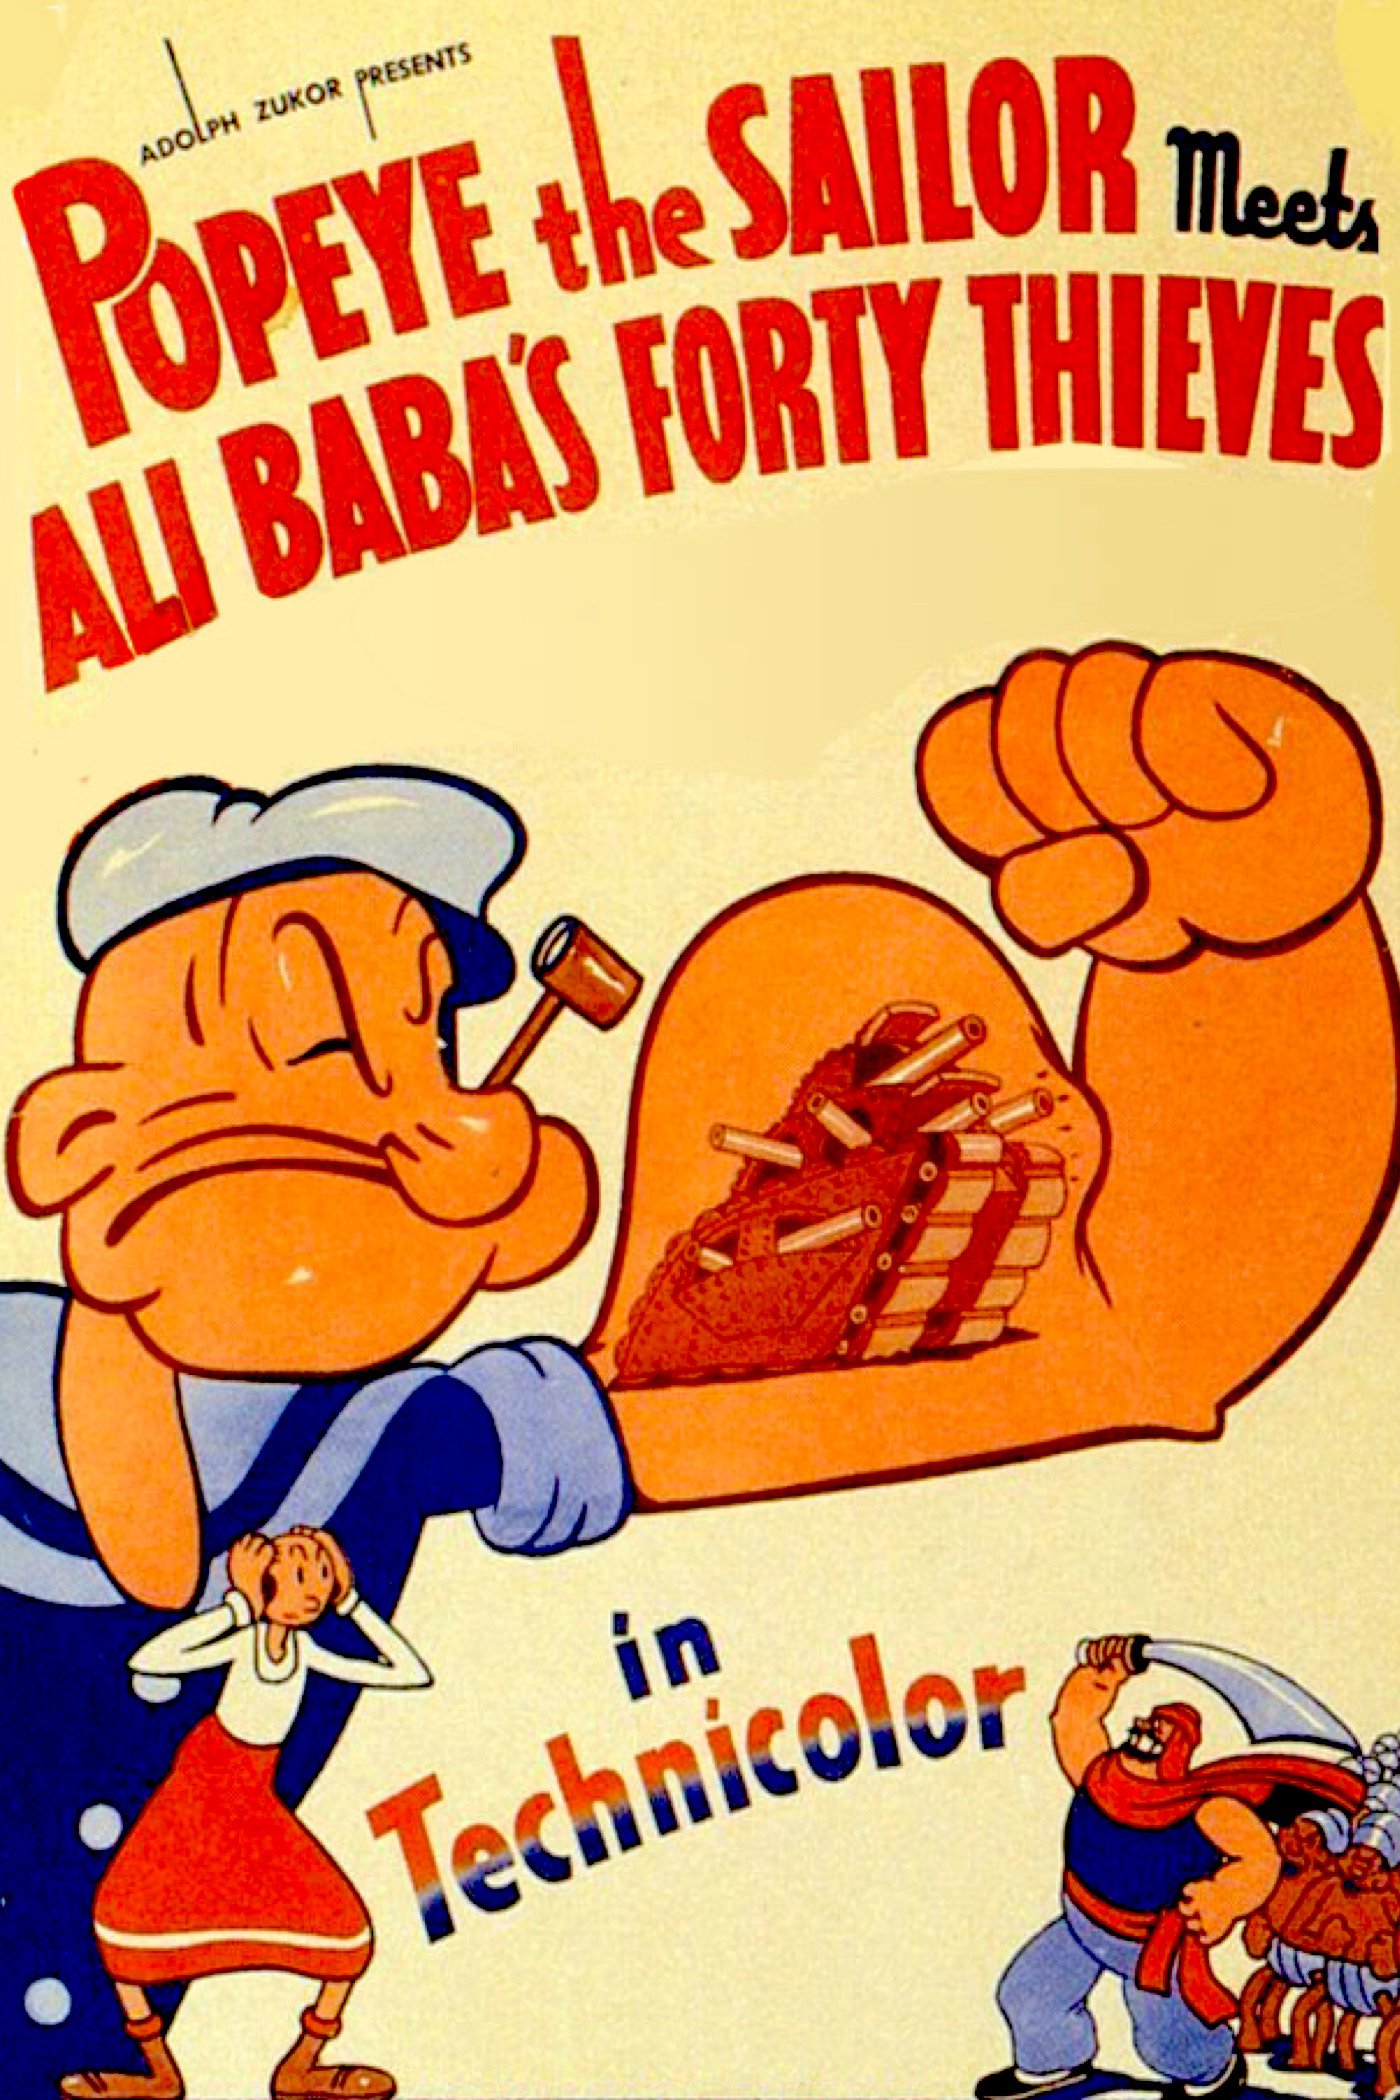 Poster for the movie "Popeye the Sailor Meets Ali Baba's Forty Thieves"